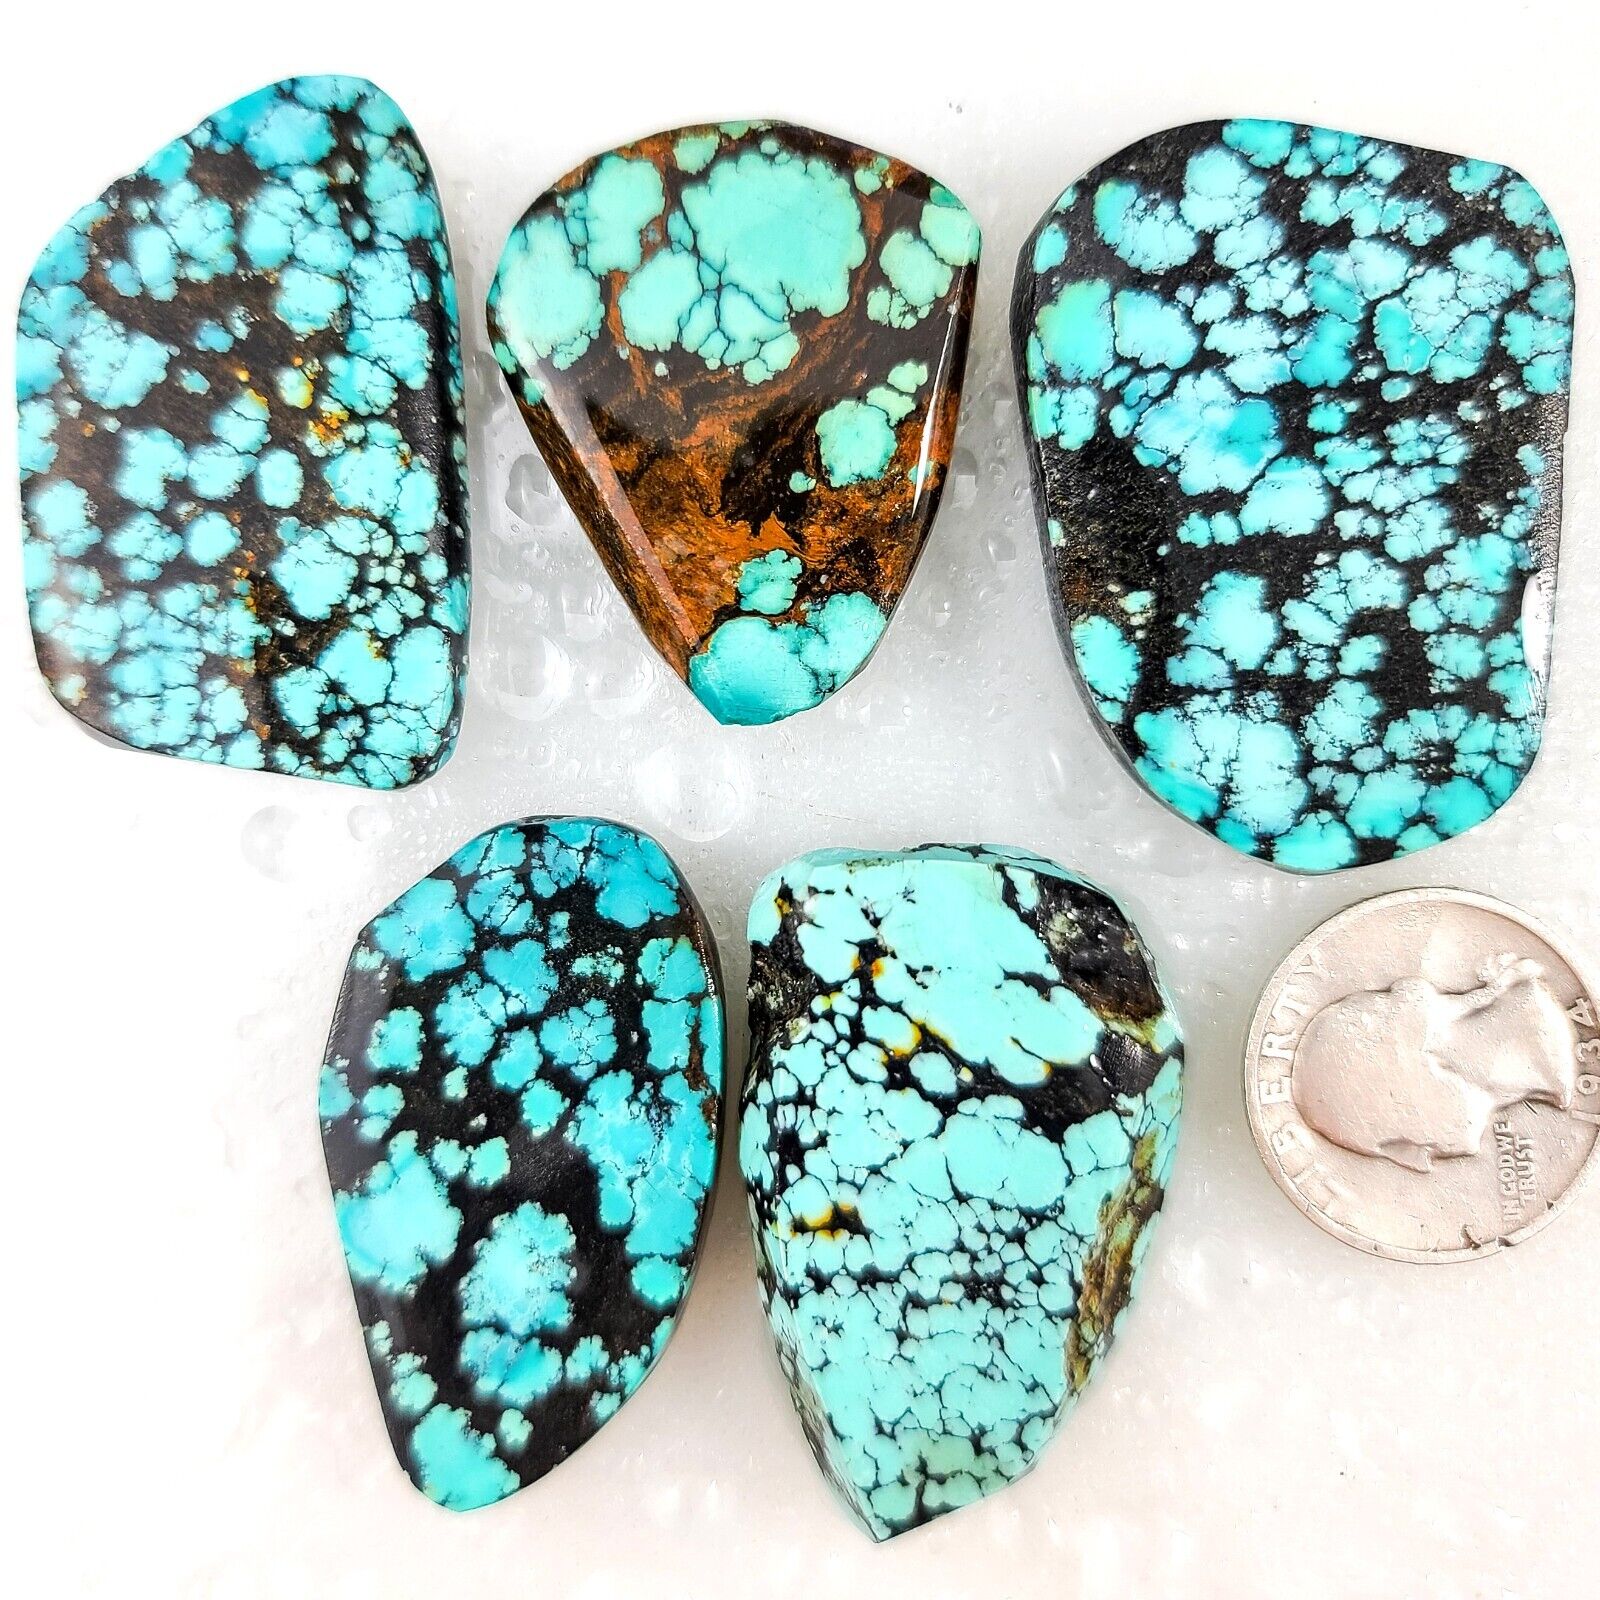 GS479 Mixed Hubei turquoise rough slabs 79.7 grams STB